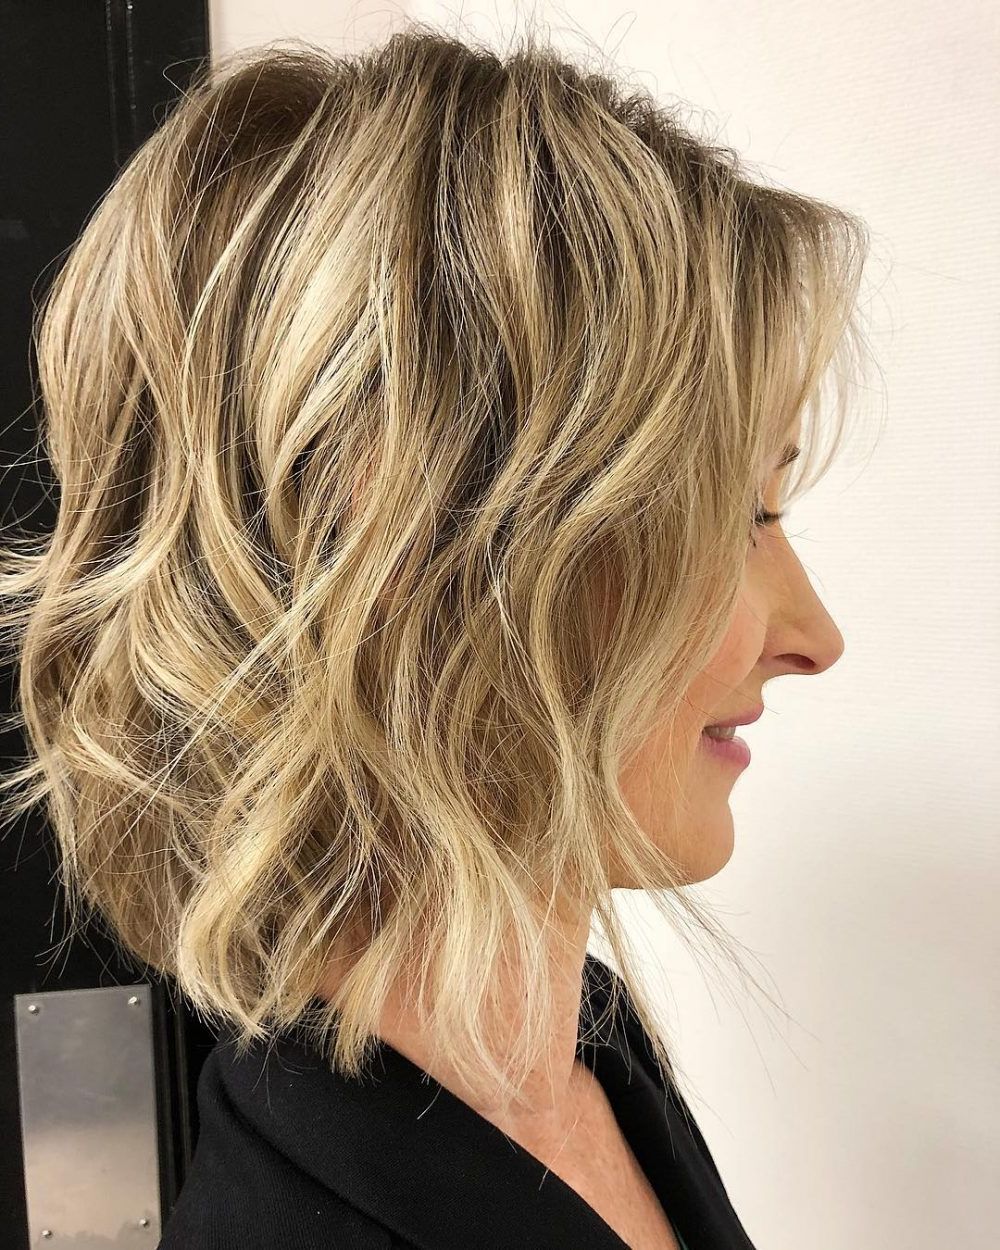 43 Perfect Short Hairstyles For Fine Hair In 2019 In Latest Funky Medium Haircuts For Fine Hair (View 4 of 20)